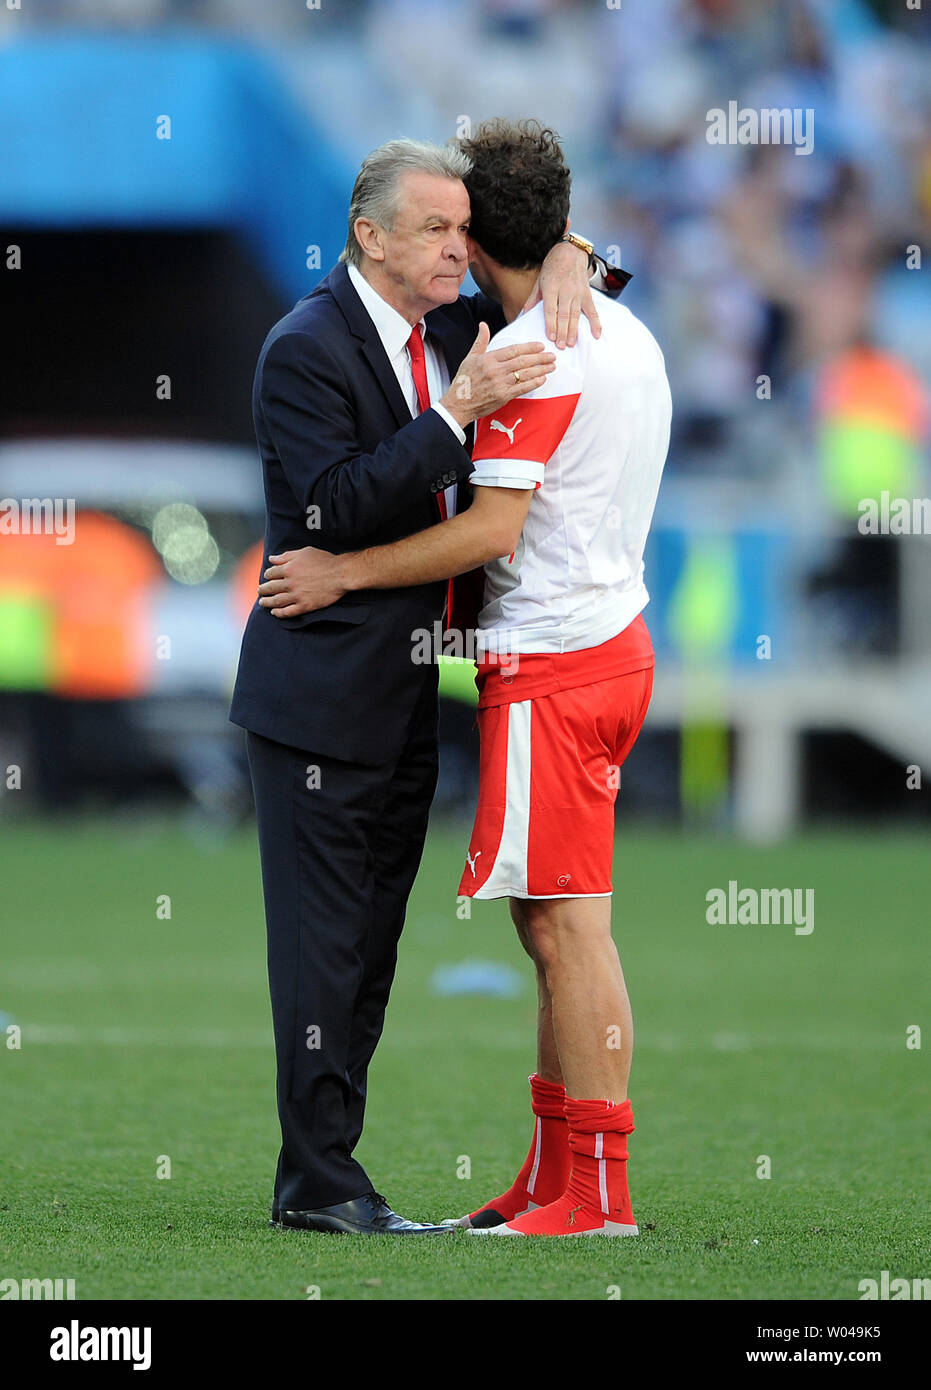 Switzerland manager Ottmar Hitzfeld consoles one of his players at full-time following the 2014 FIFA World Cup Round of 16 match at the Arena Corinthians in Sao Paulo, Brazil on July 01, 2014. UPI/Chris Brunskill Stock Photo